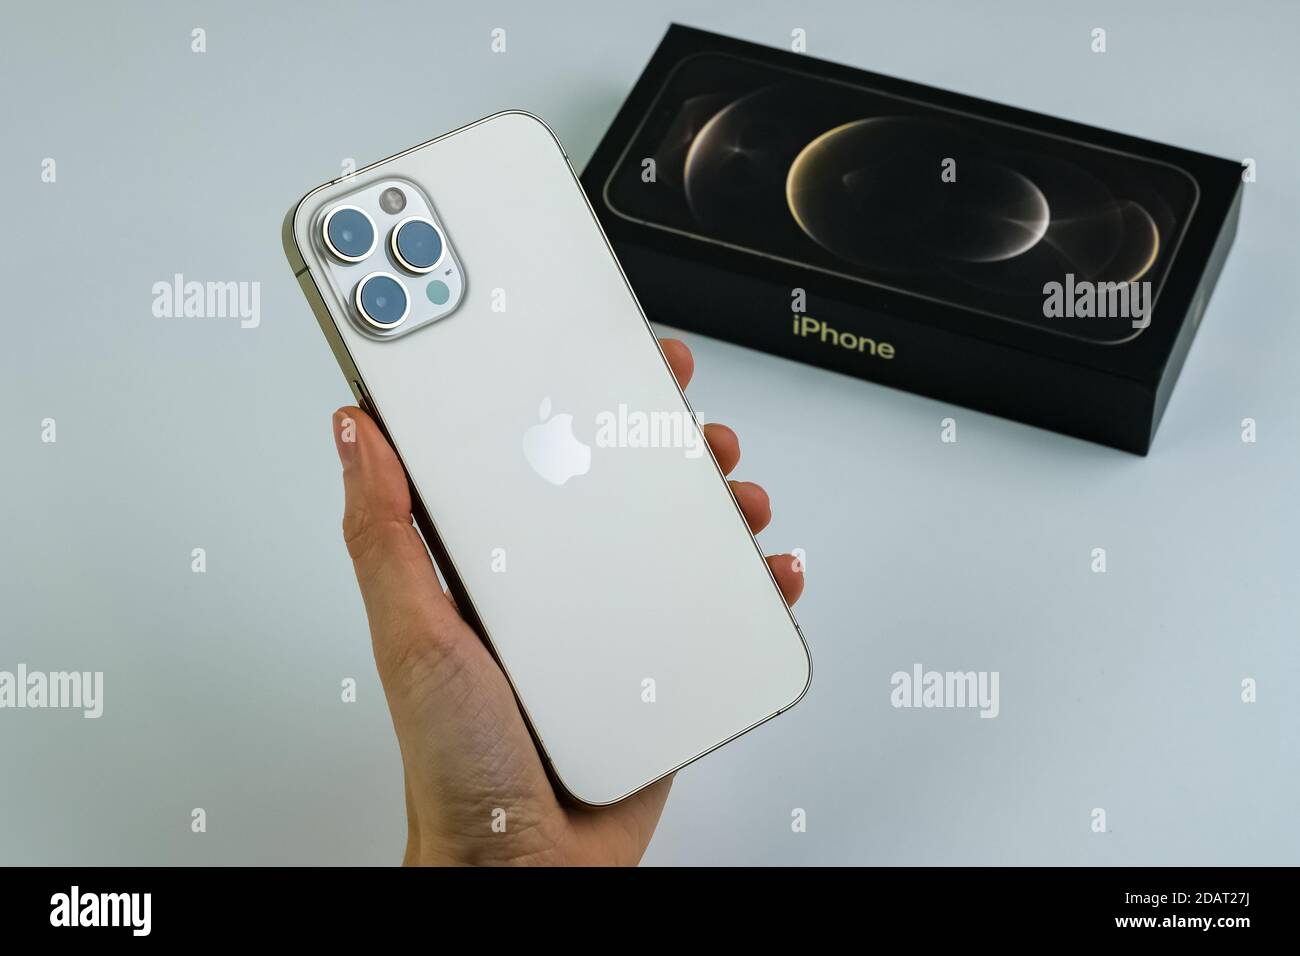 Iphone 12 Pro Max In The Gold Color In The Hand Of A Customer Stock Photo Alamy